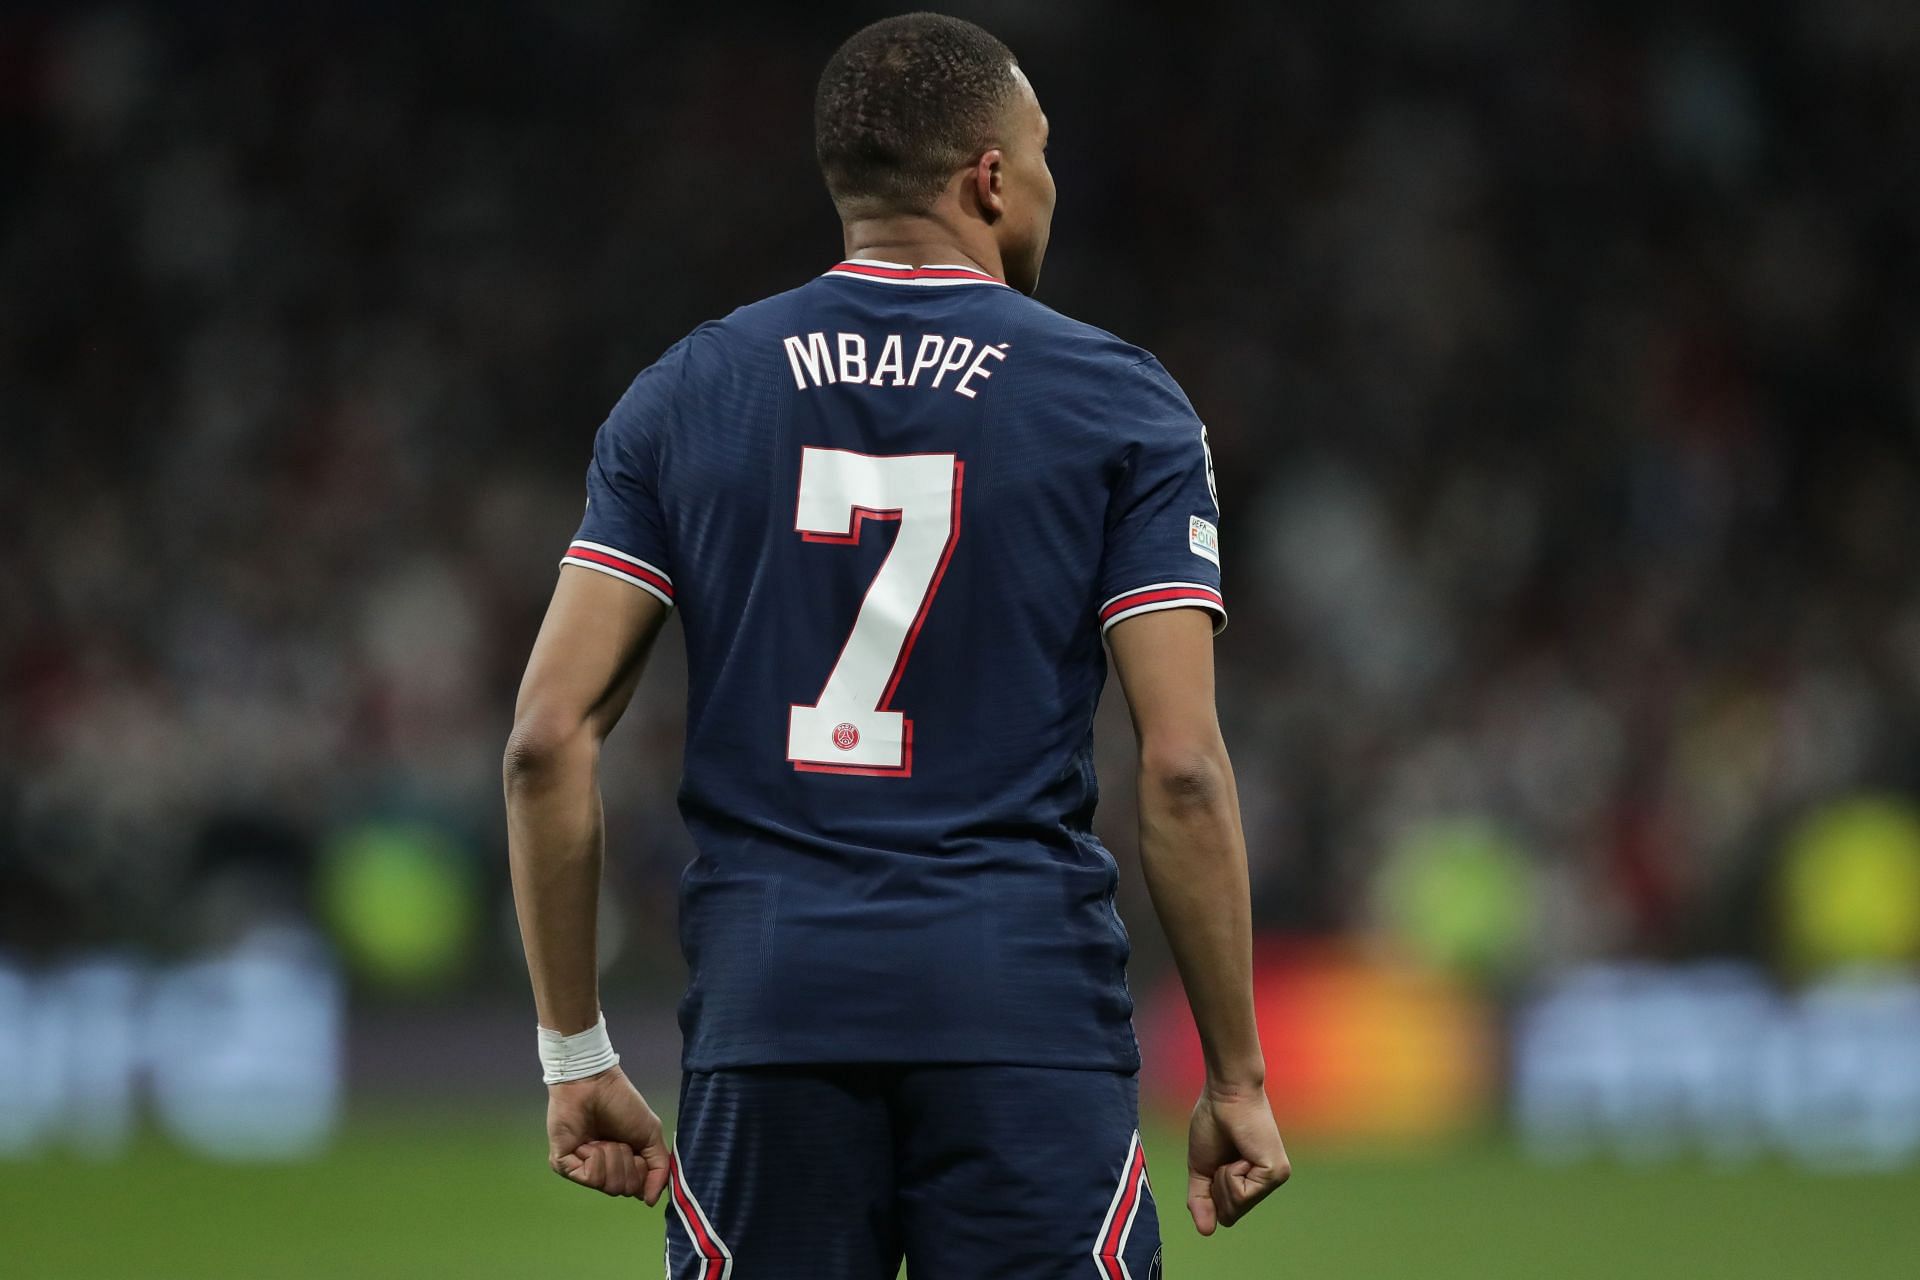 Mbappe is yet to decide on his future